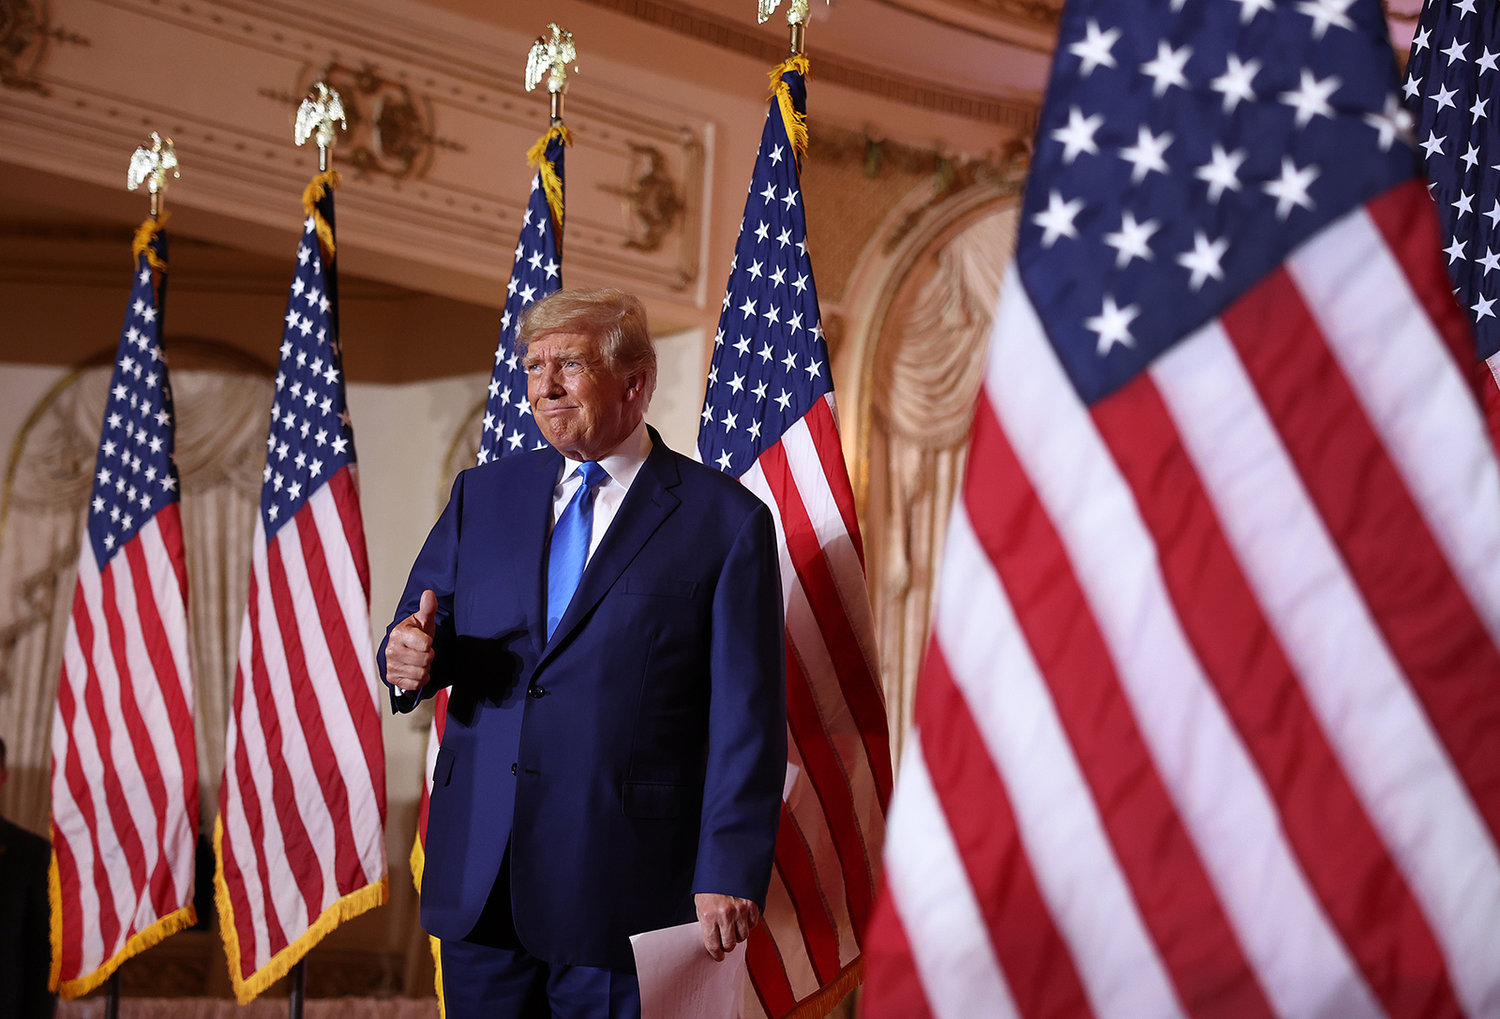 Former U.S. President Donald Trump speaks during an election night event at Mar-a-Lago on Nov. 8, 2022, in Palm Beach, Florida. Trump addressed his supporters as the nation awaits the results of the midterm elections. (Joe Raedle/Getty Images/TNS)